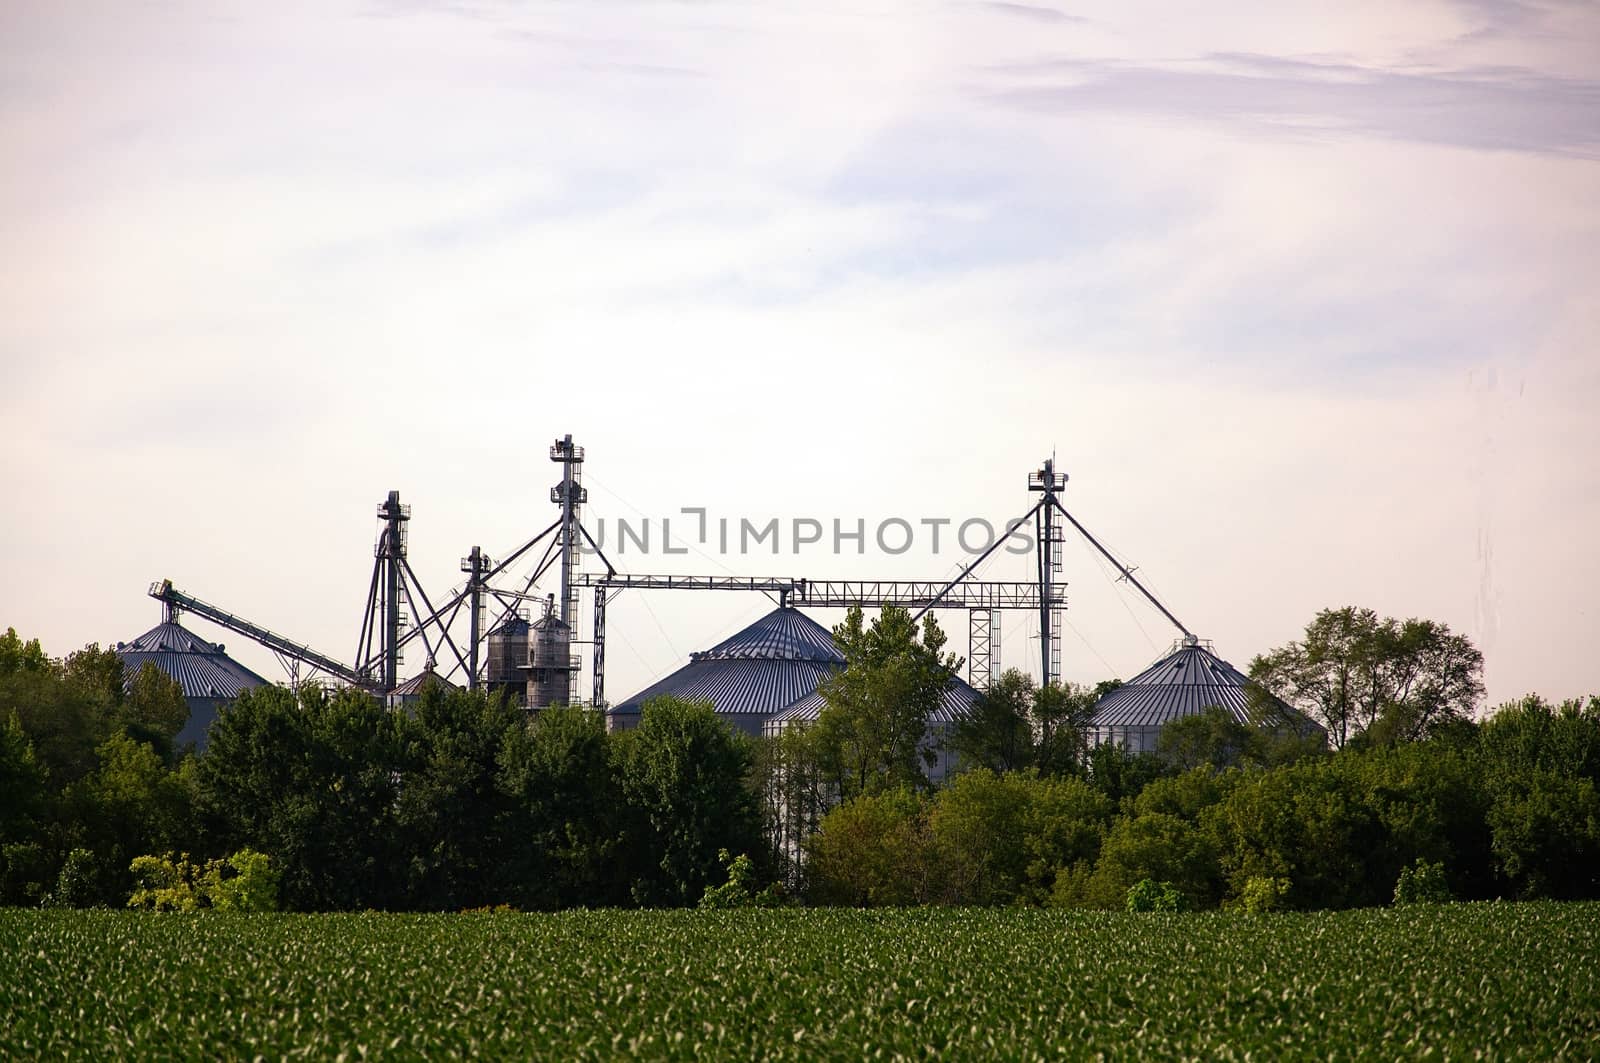 These are grain storage facilities awaiting the local crops on a summer day.